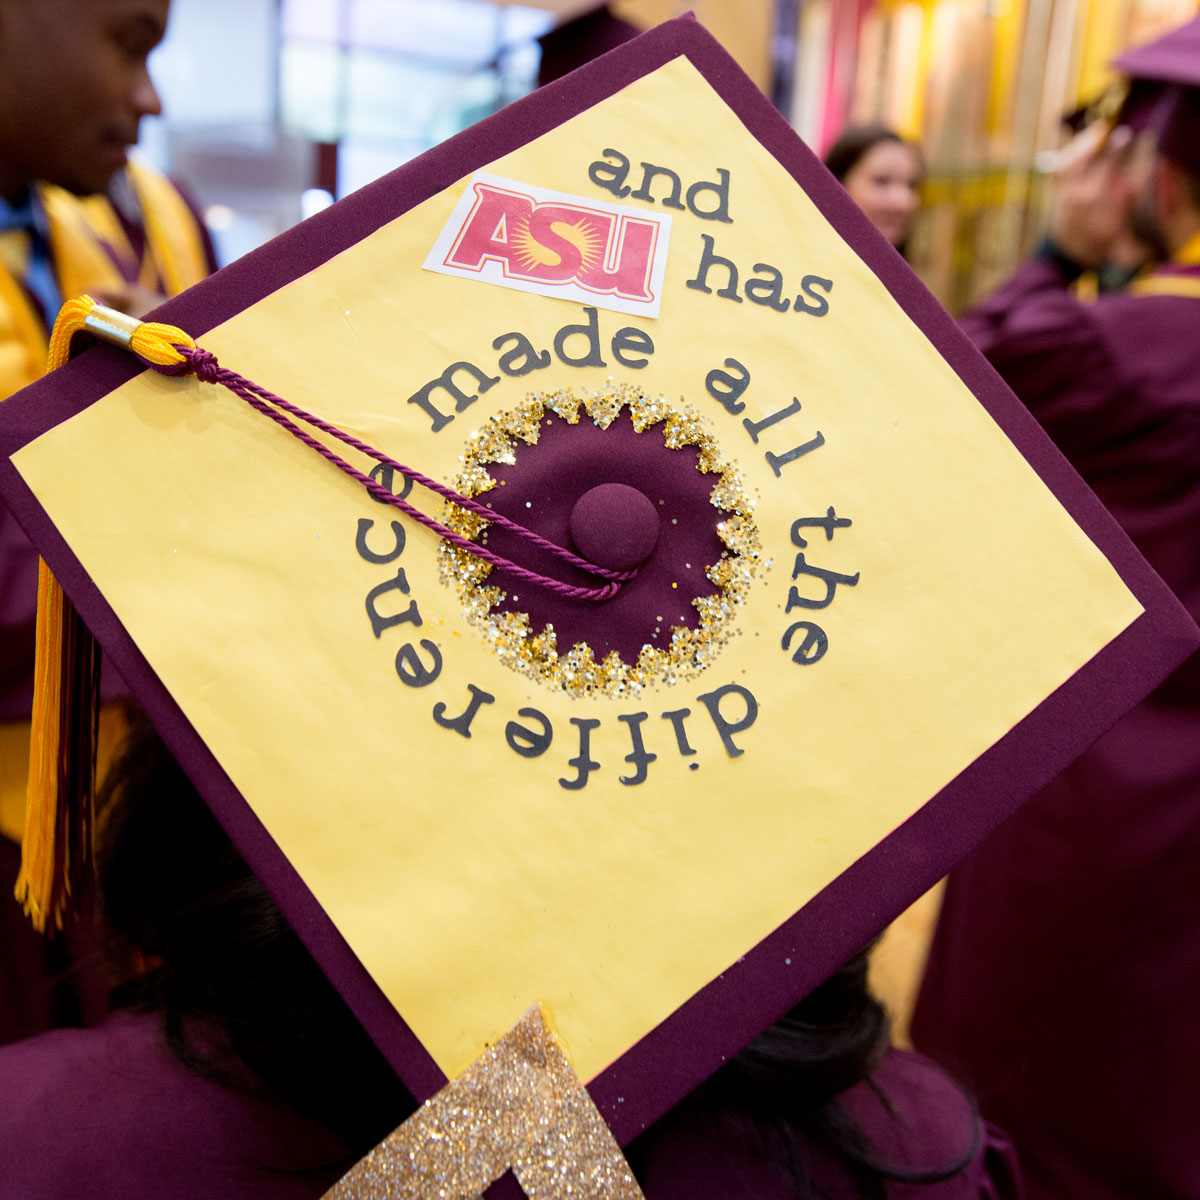 A graduate's mortarboard decoration speaks of their appreciation for ASU's dedication to students. This semester, the mechanical engineering faculty went above and beyond to help students prepare for the FE exam.